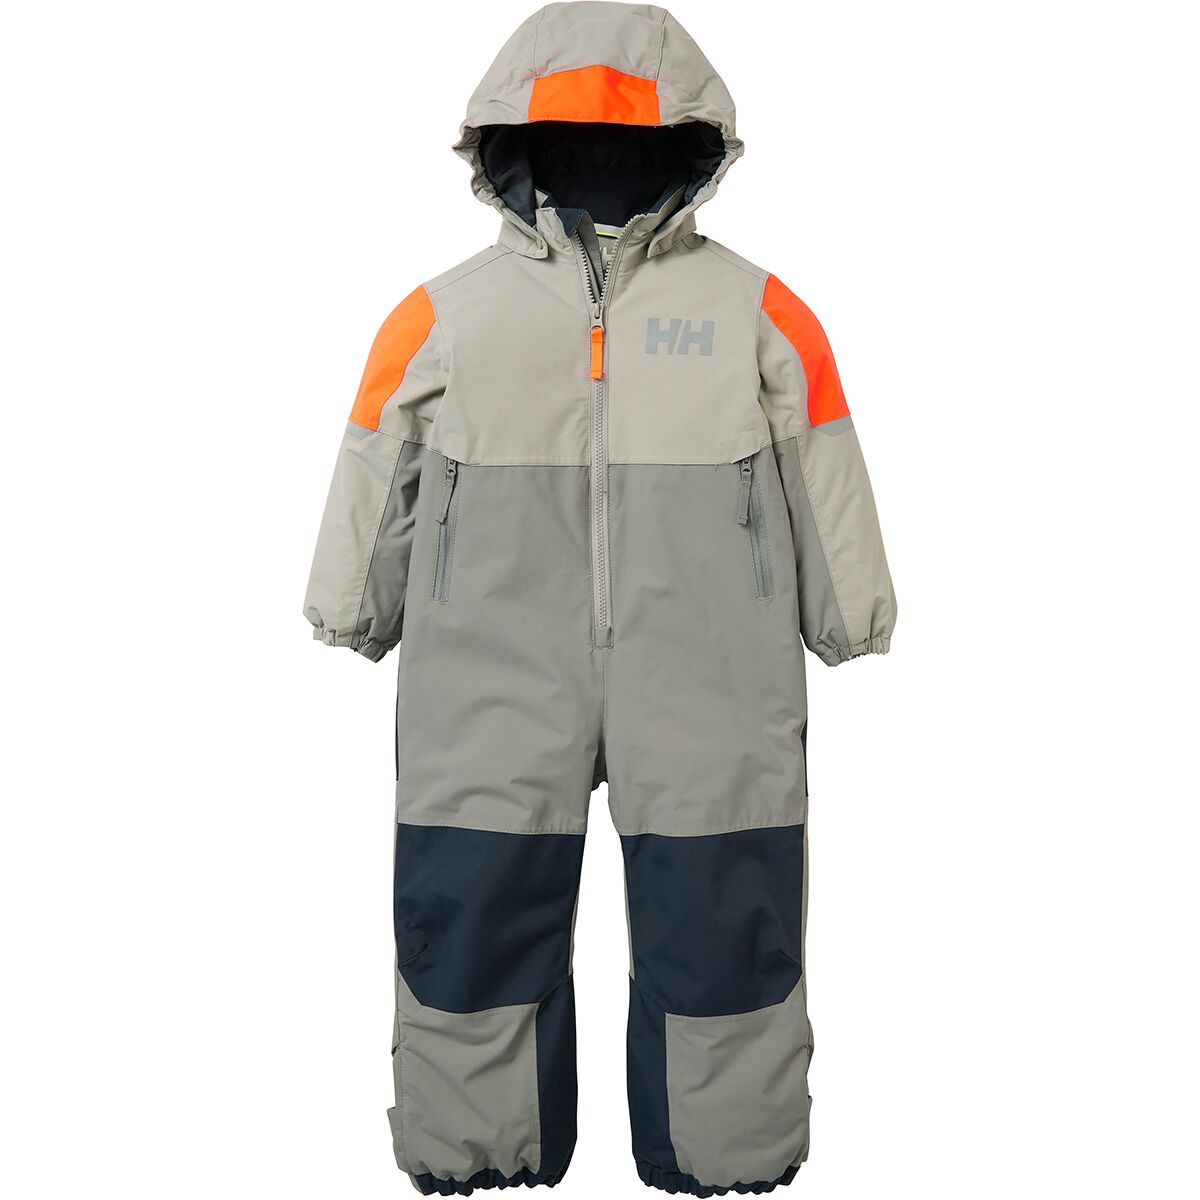 Helly Hansen Rider 2.0 Insulated Snow Suit - Toddlers' | Backcountry